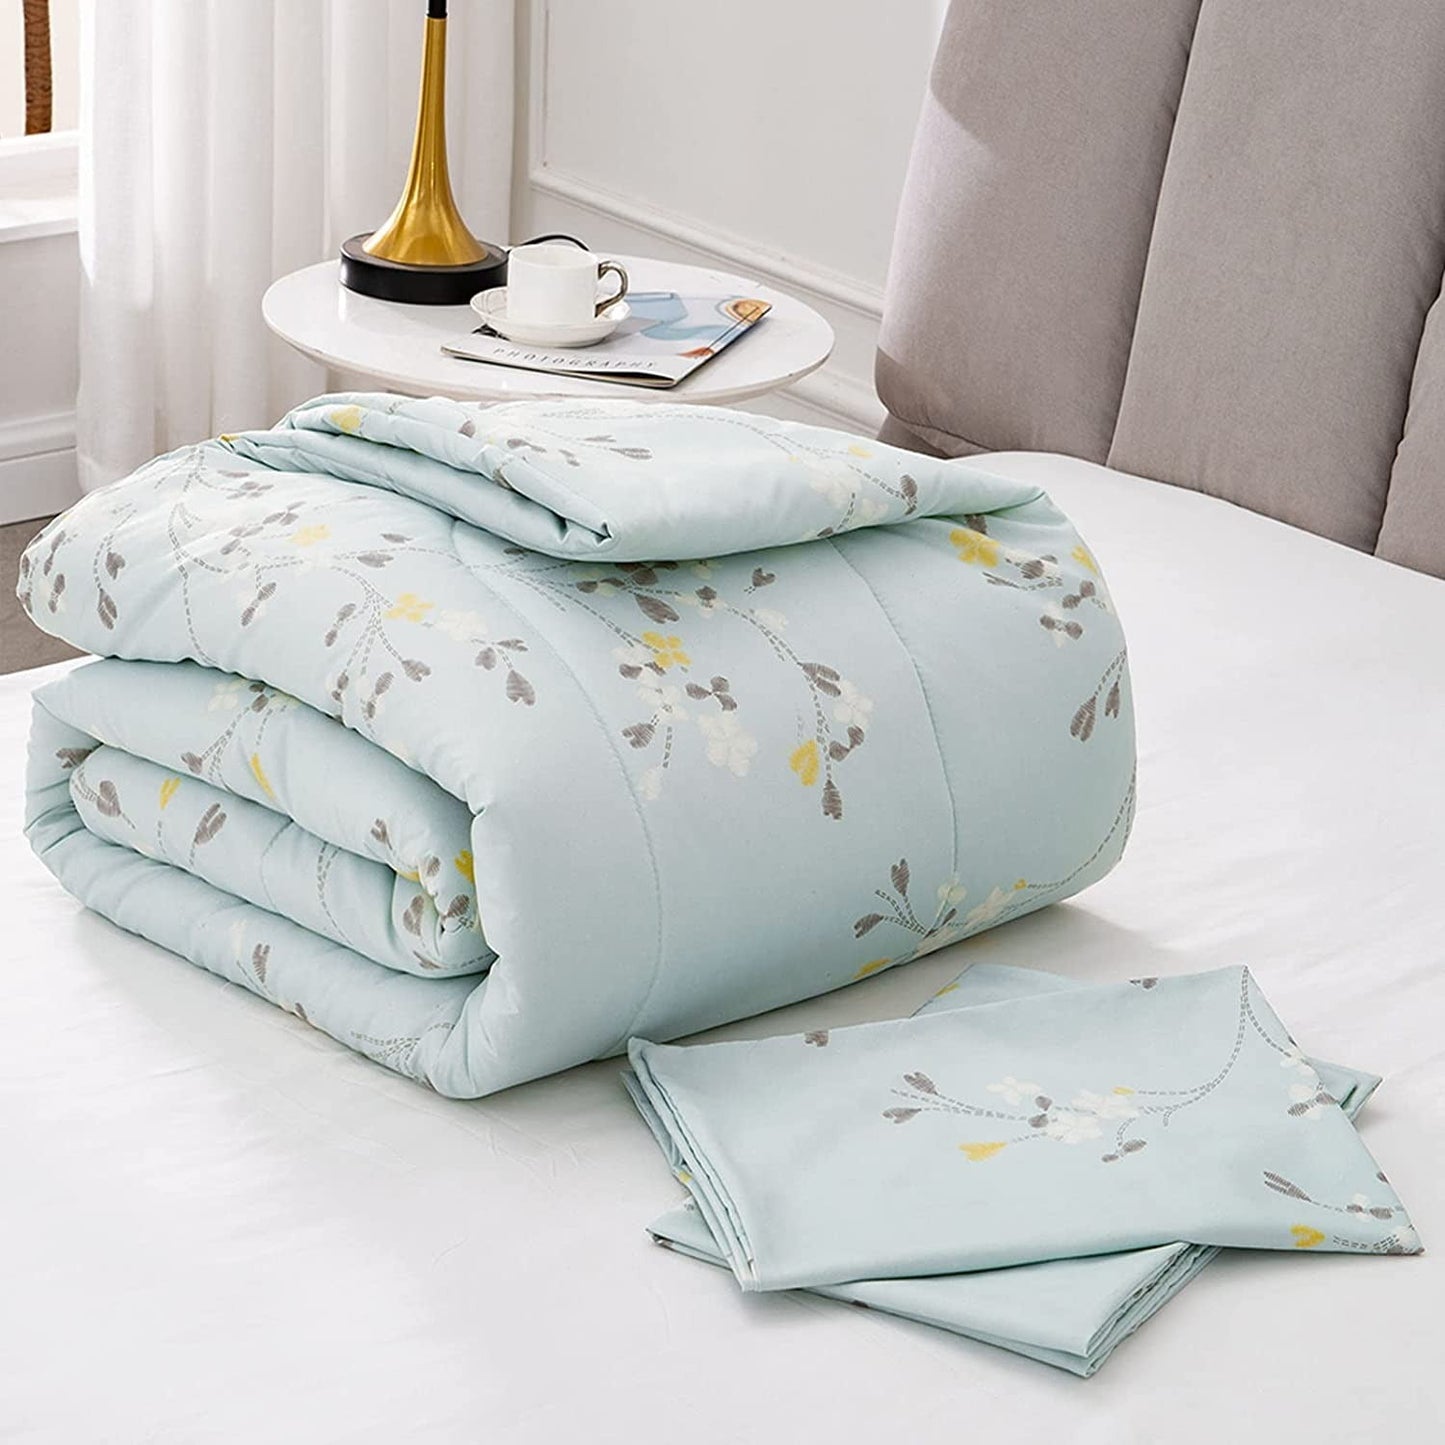 Exclusivo Mezcla 2-Piece Floral Twin Comforter Set, Microfiber Bedding Down Alternative Comforter for All Seasons with 1 Pillow Sham, Baby Blue